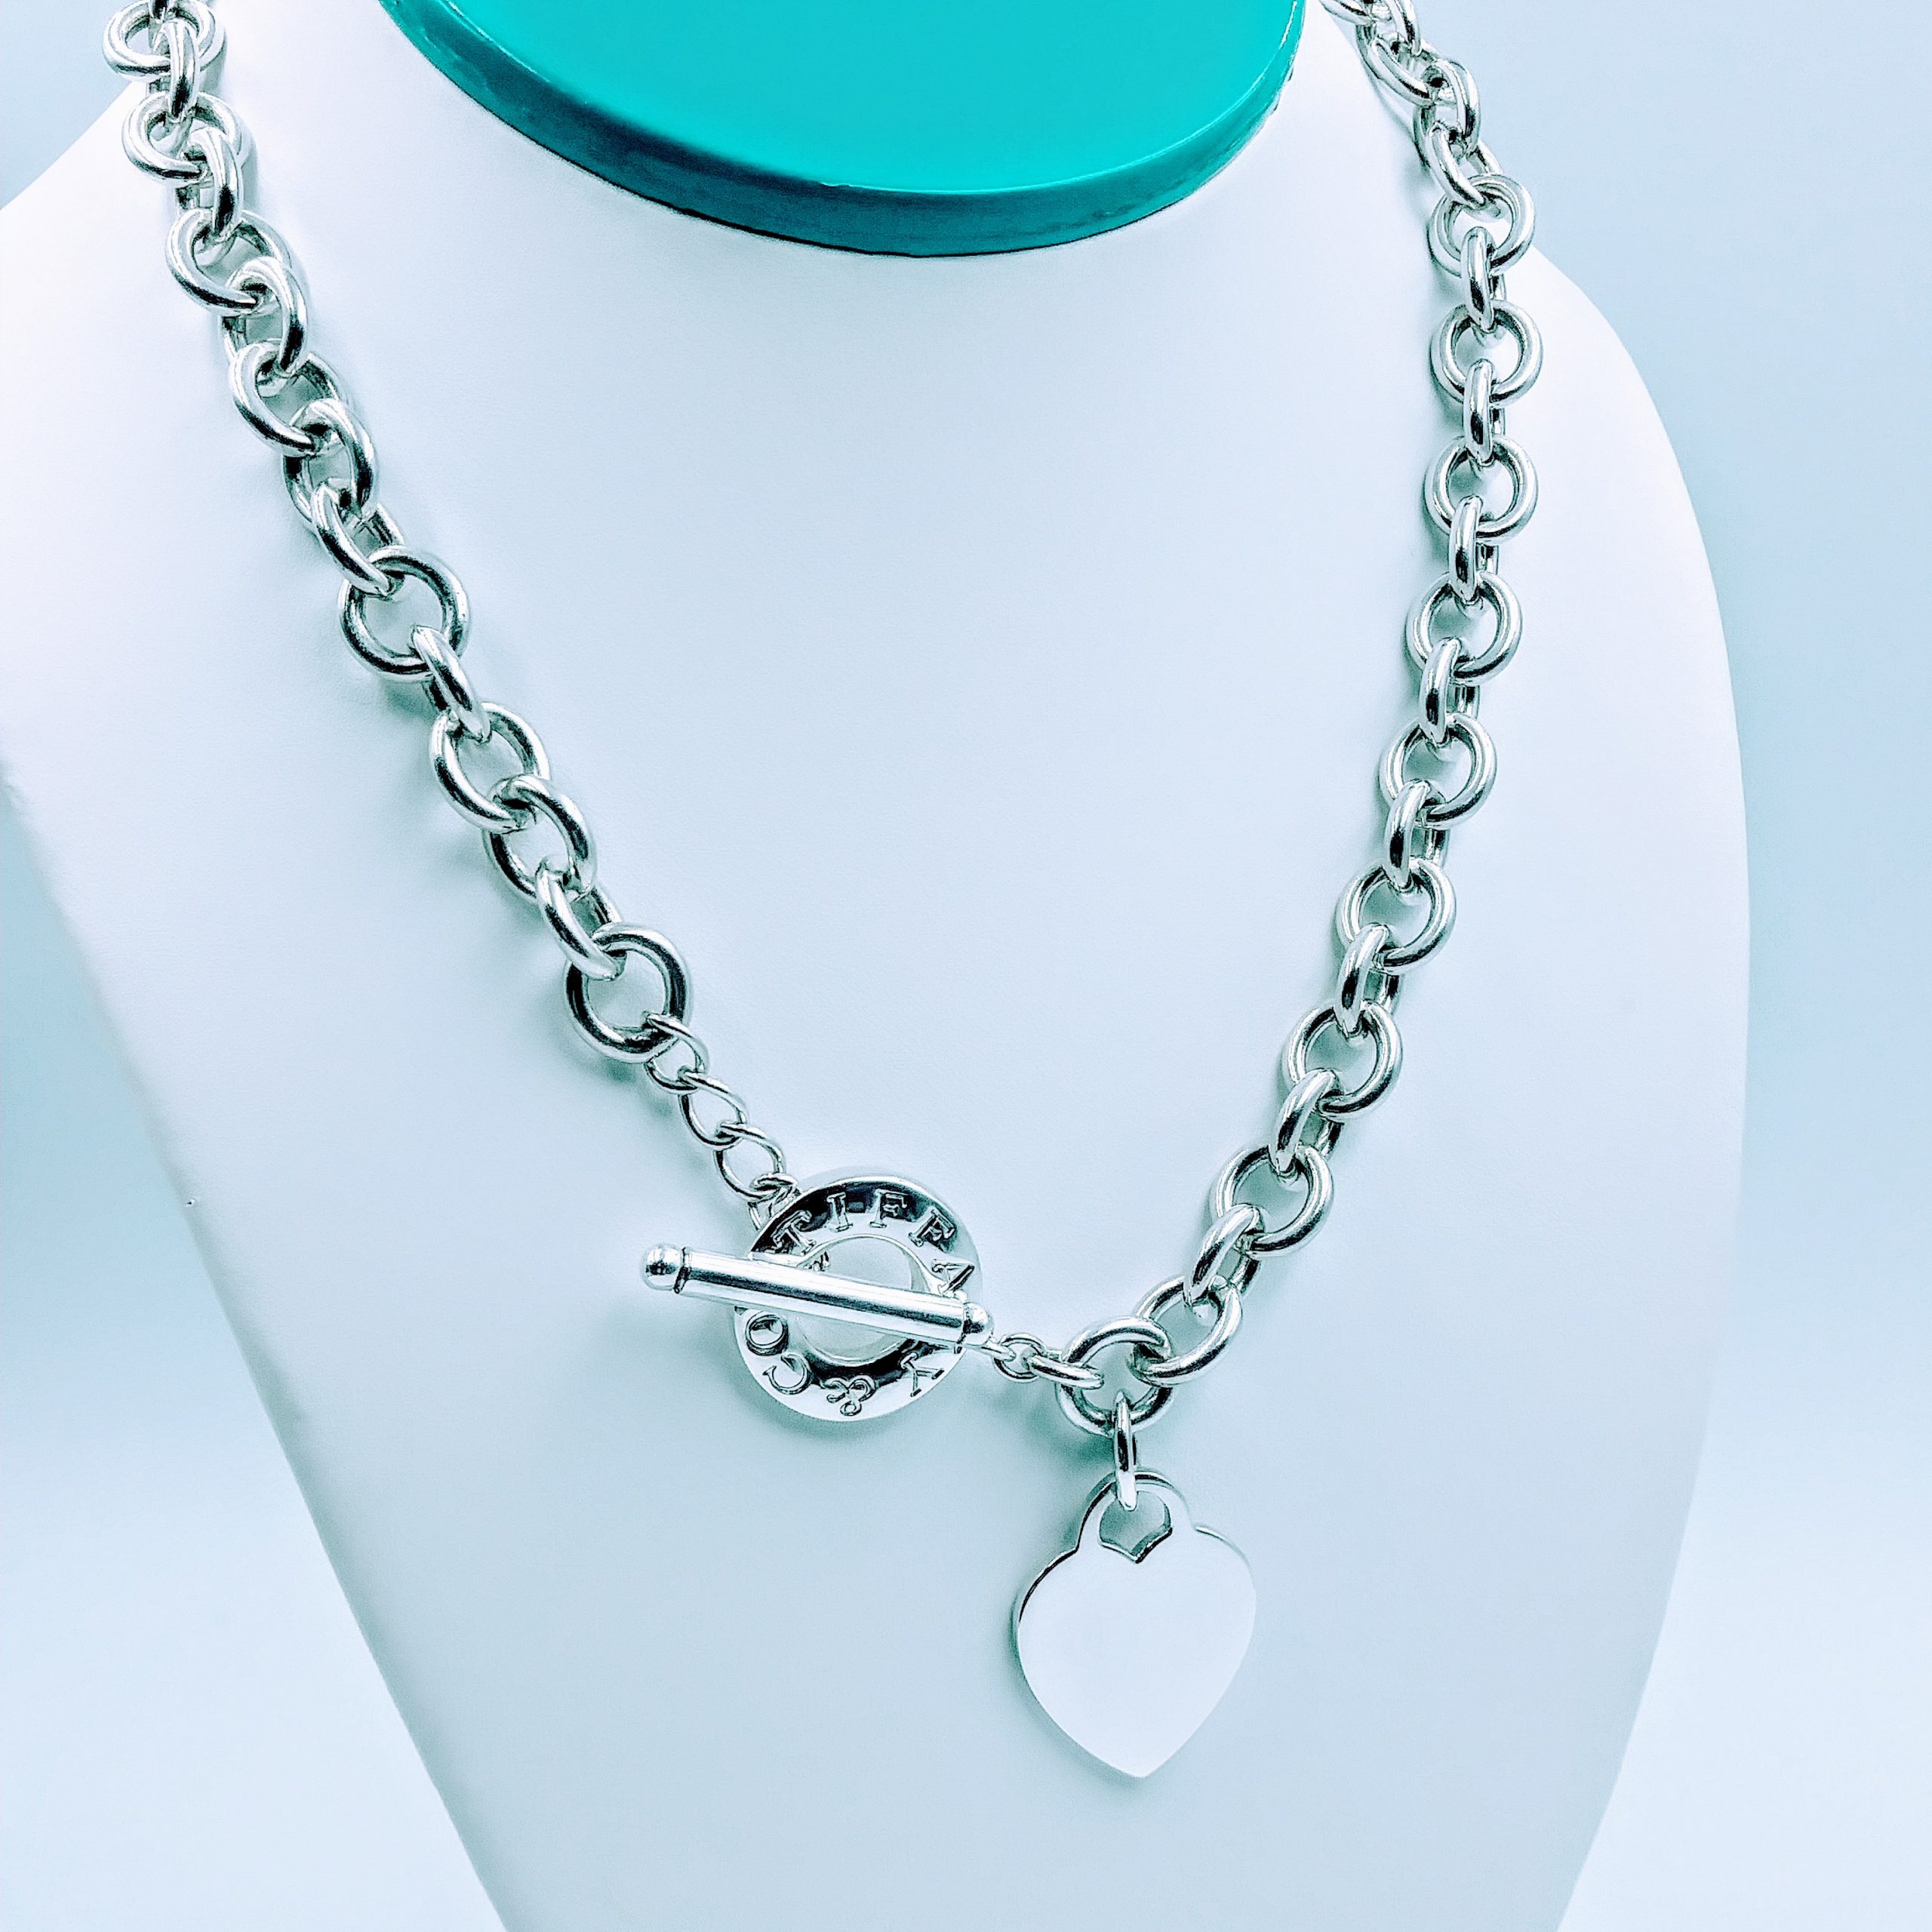 Tiffany & Co. Large Heart Lock Necklace 16" Silver 925